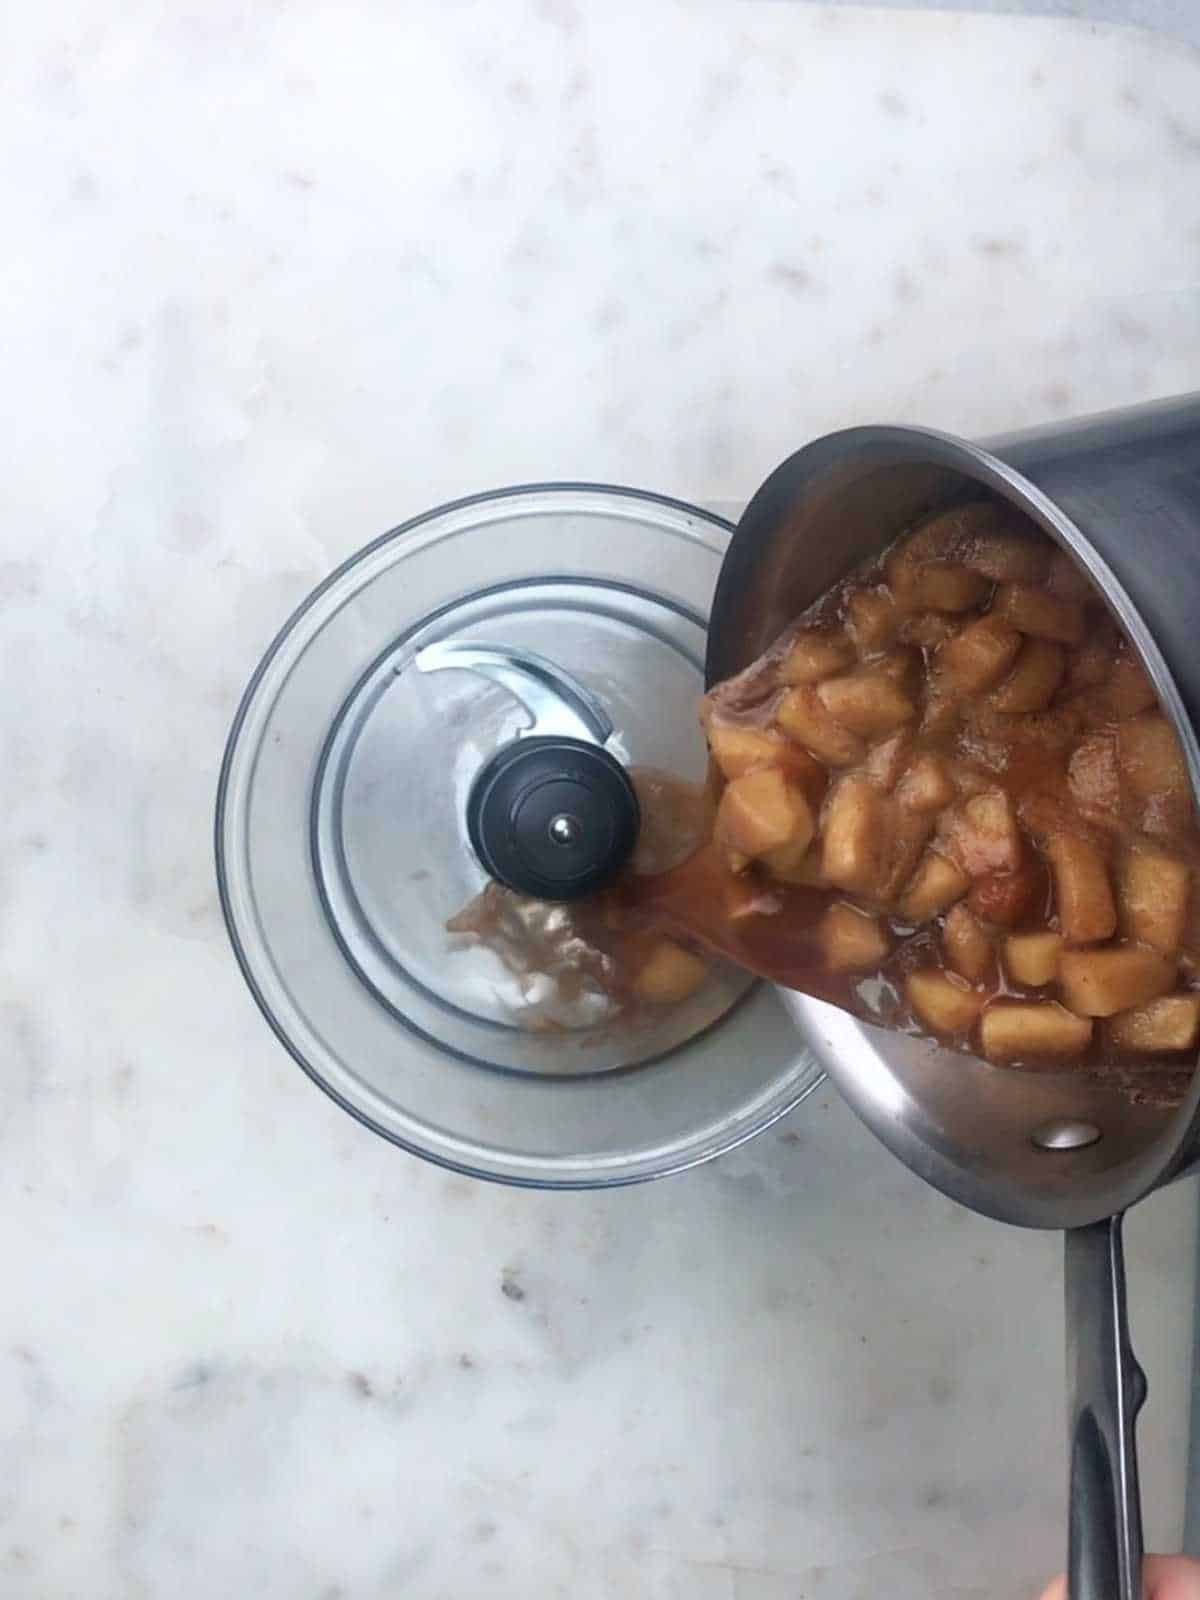 Pouring cooked apples into food processor bowl..